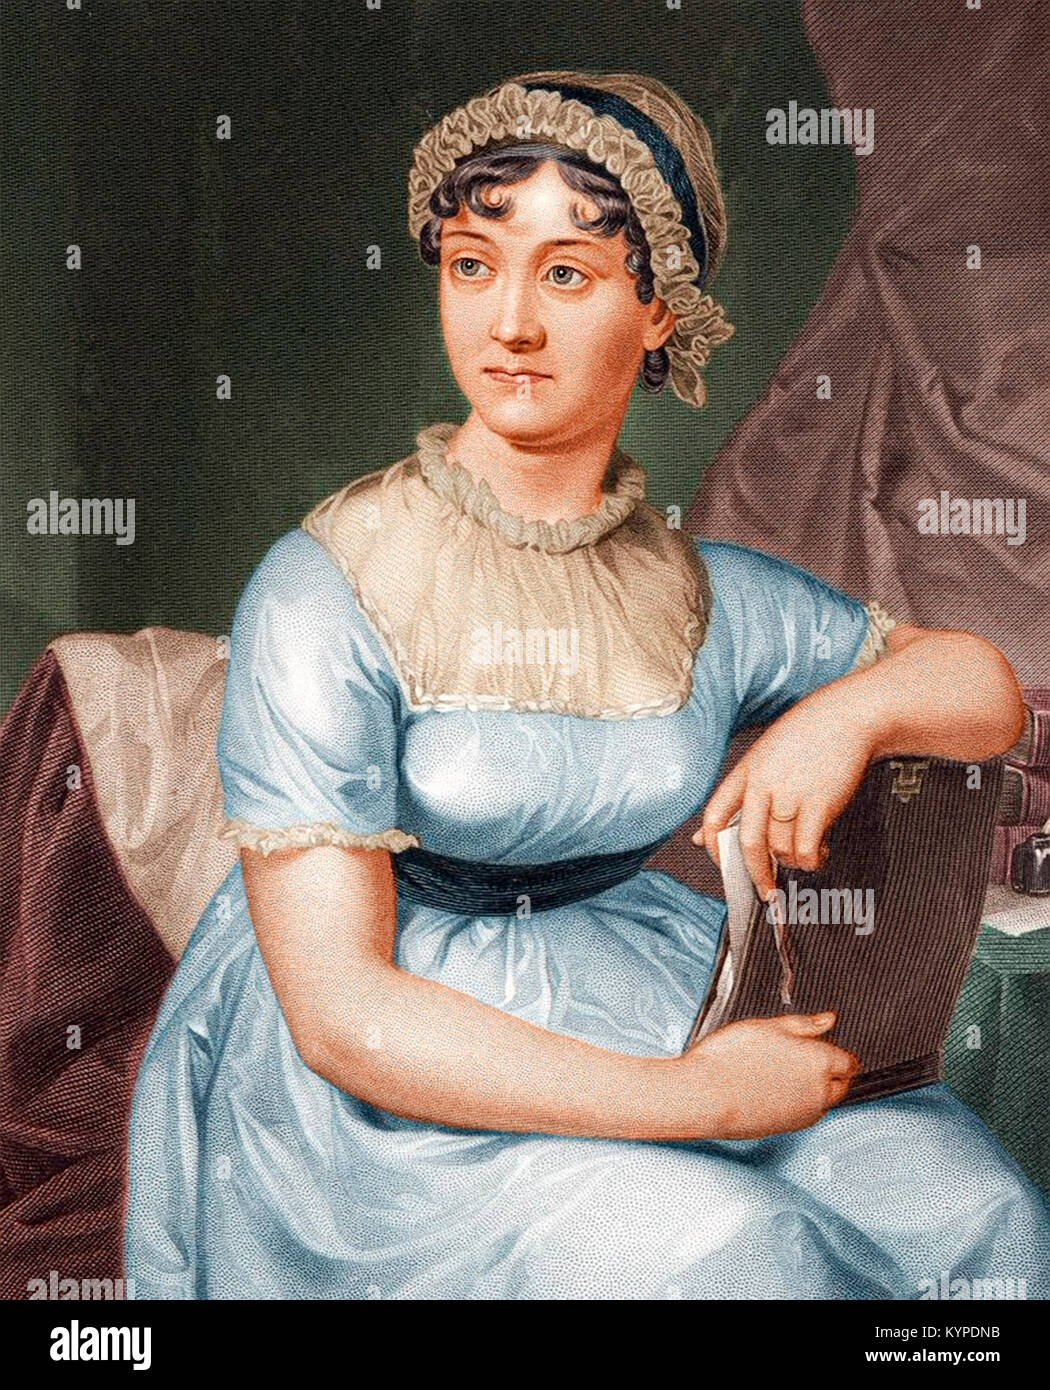 Jane austen hi-res stock photography and images - Alamy